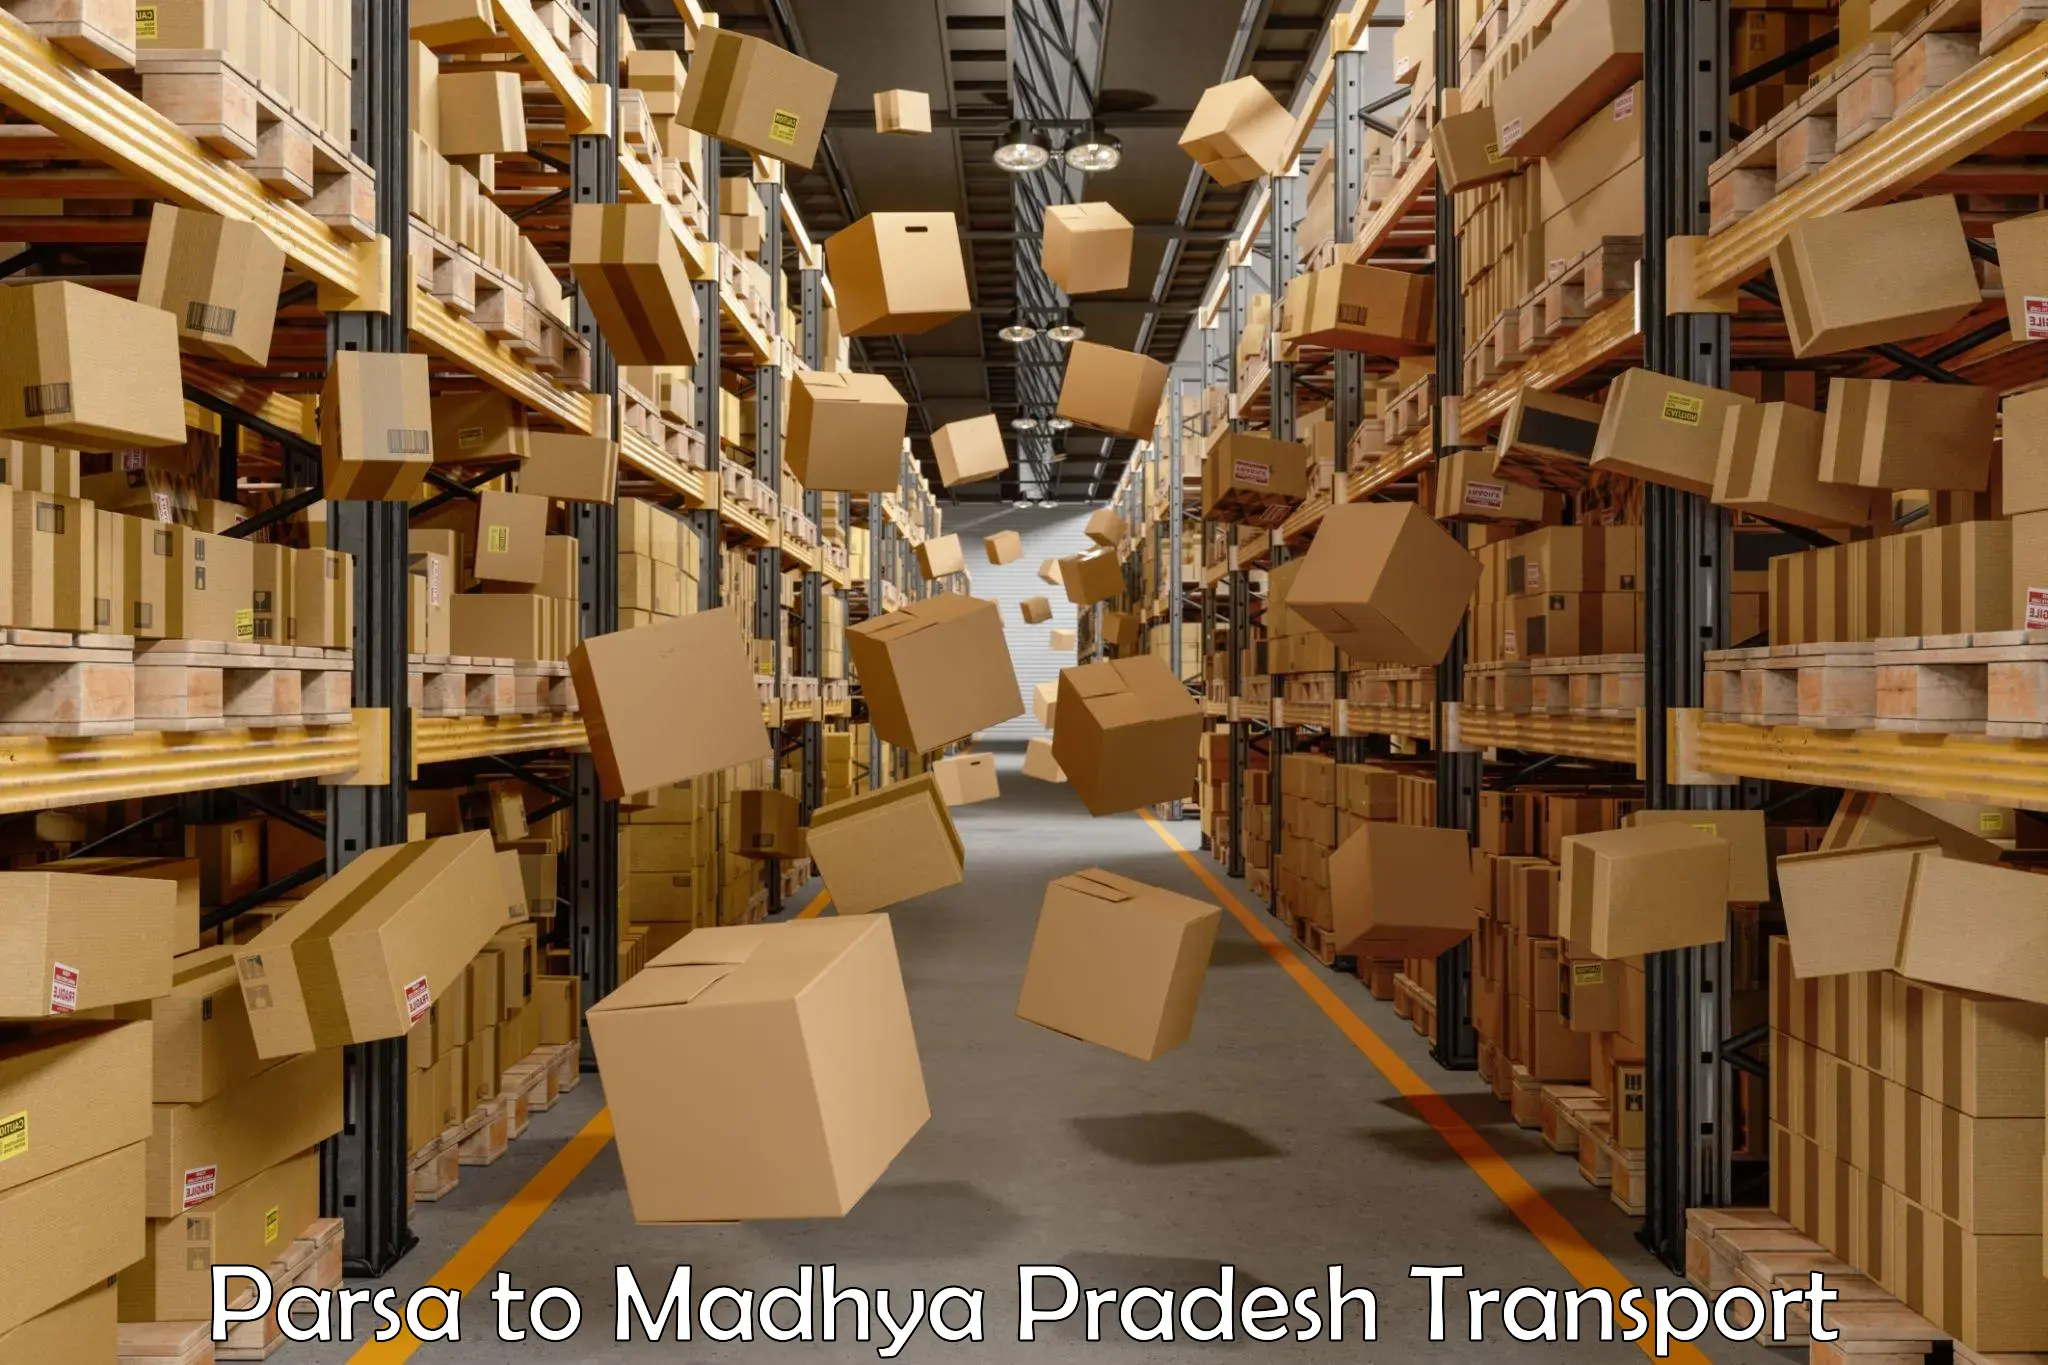 Air freight transport services in Parsa to Madhya Pradesh